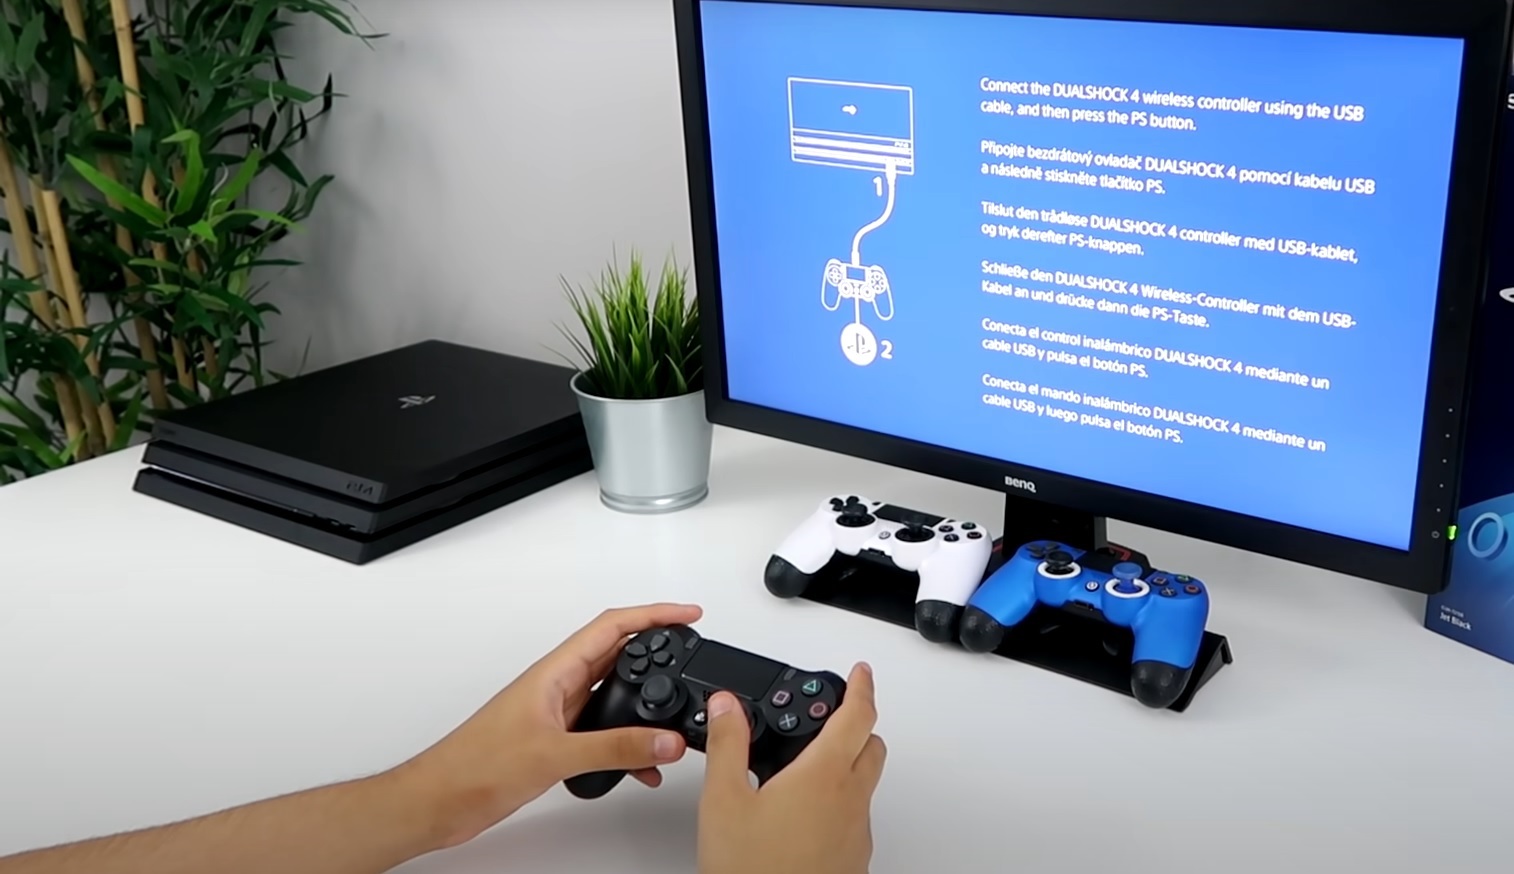 Prompt to connect DualShock®4 controller to PS4 console